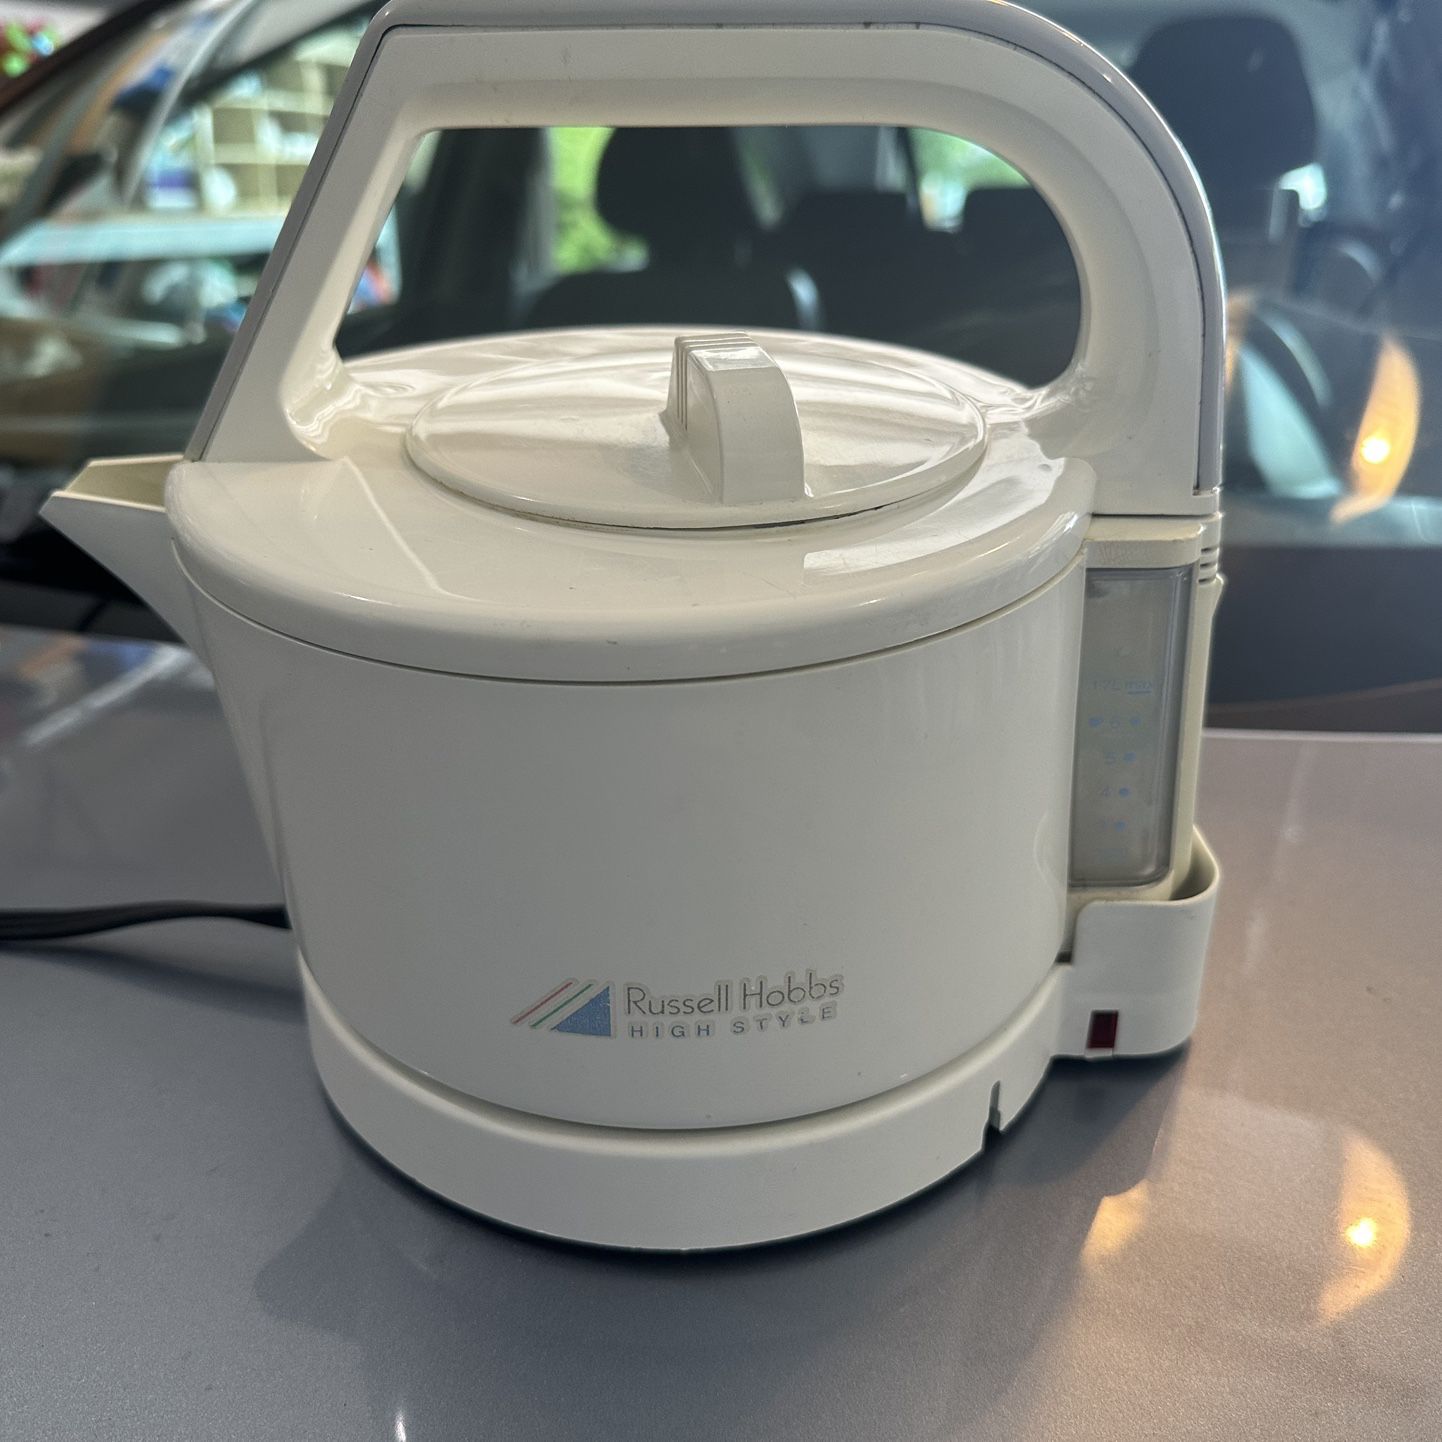 Russell Hobbs Electric Tea Kettle Free for Sale in Yelm, WA - OfferUp